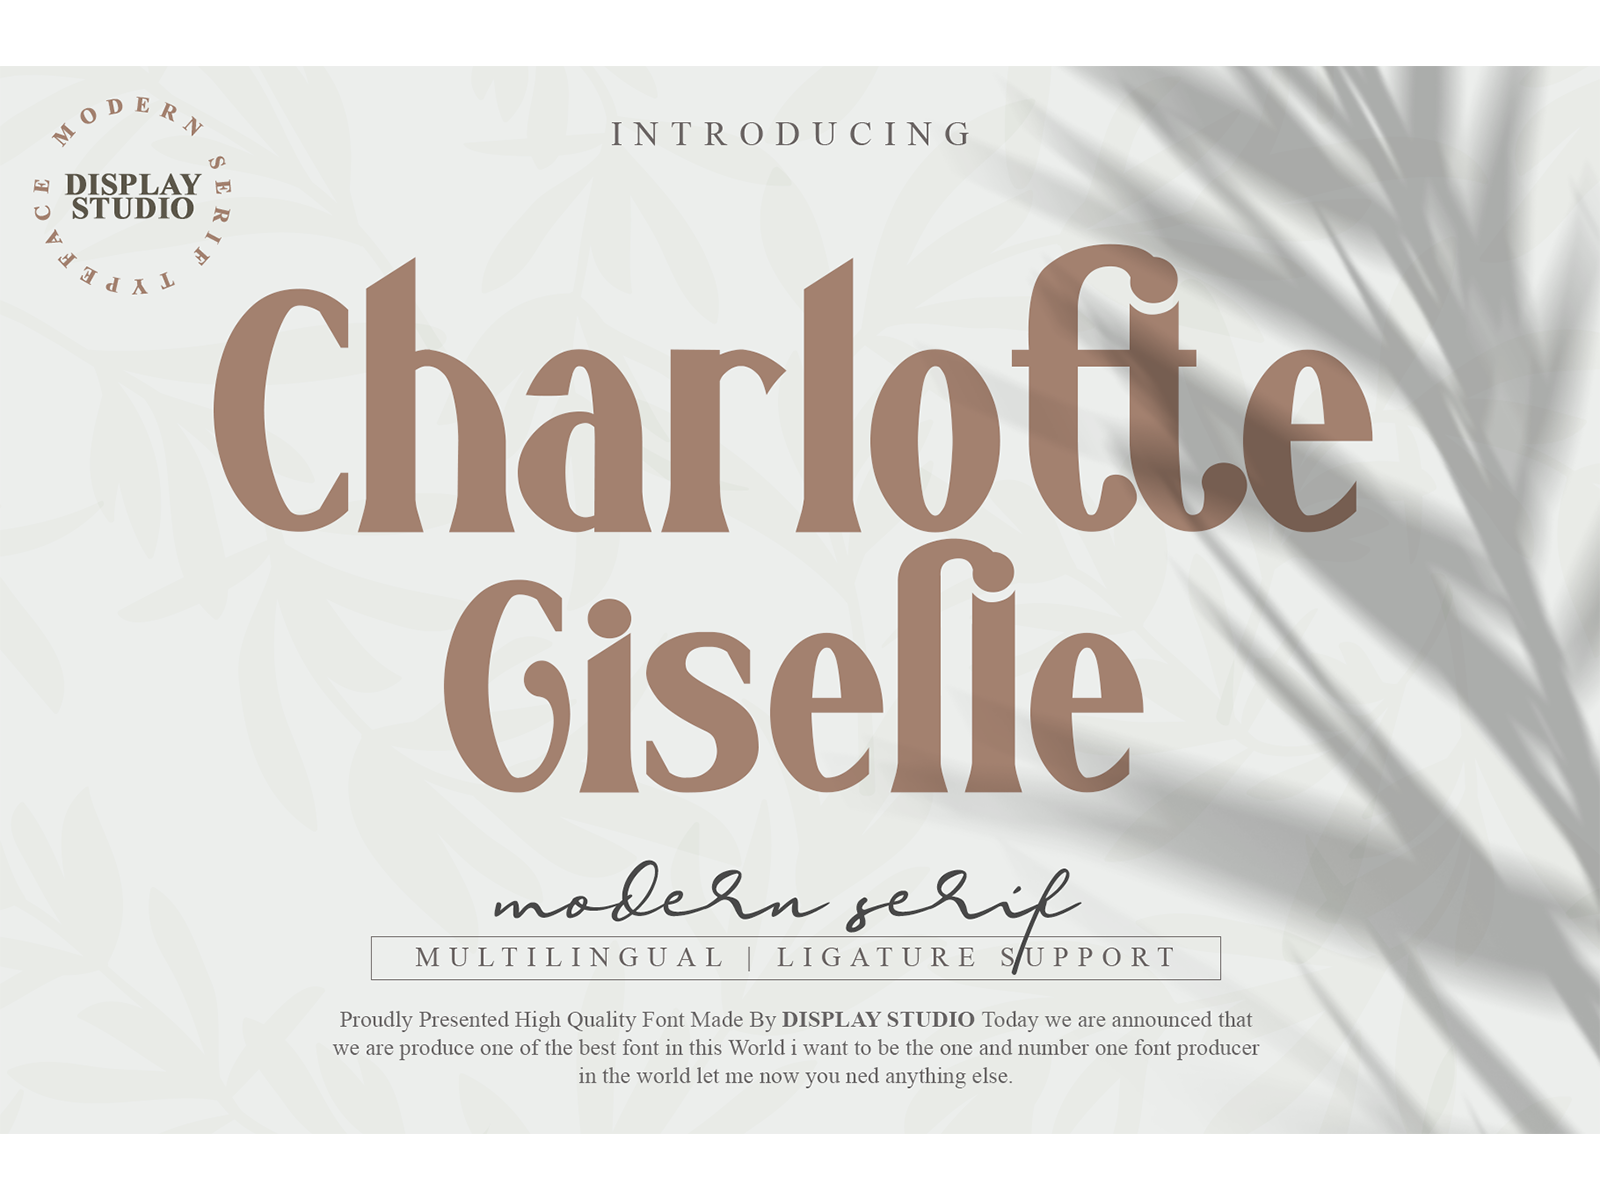 Charlotte Giselle Font by Display Studio on Dribbble